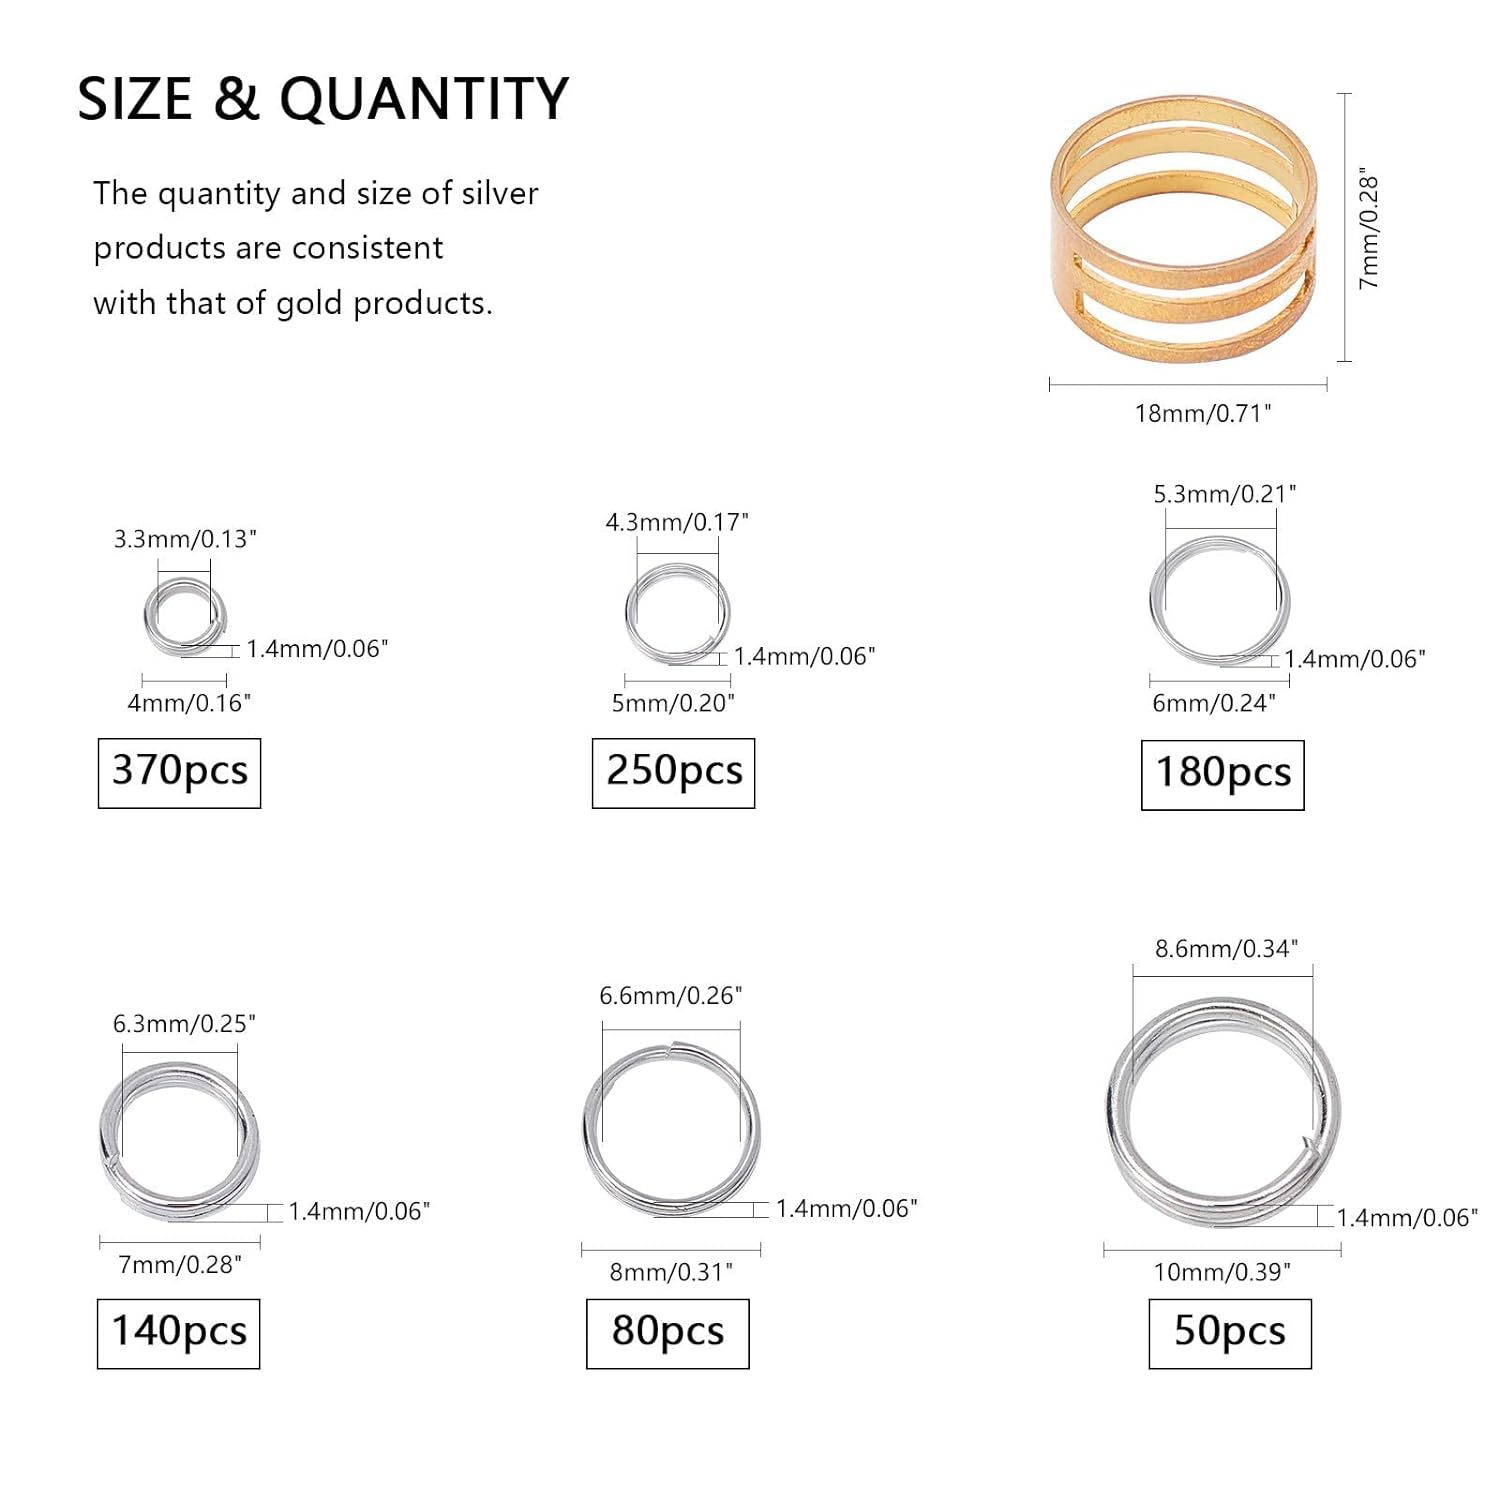 Uxcell 25mm Jump Rings, 100 Pack Metal O Ring Open Jump Rings for